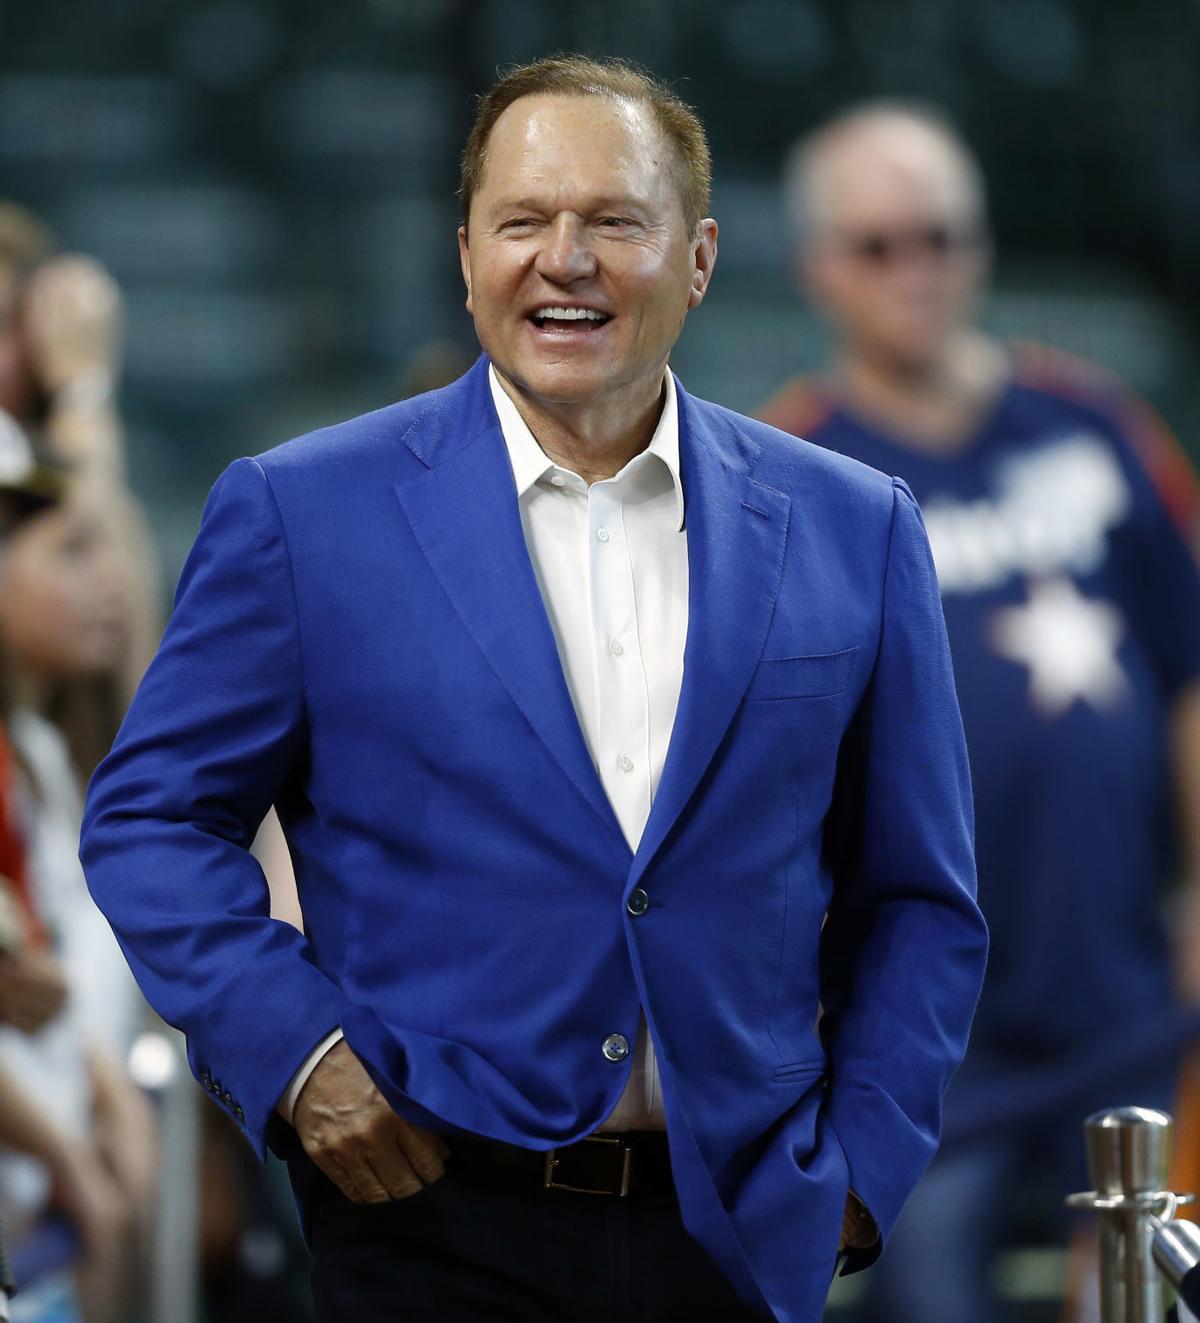 Scott Boras pitches 162game MLB schedule with a World Series game on